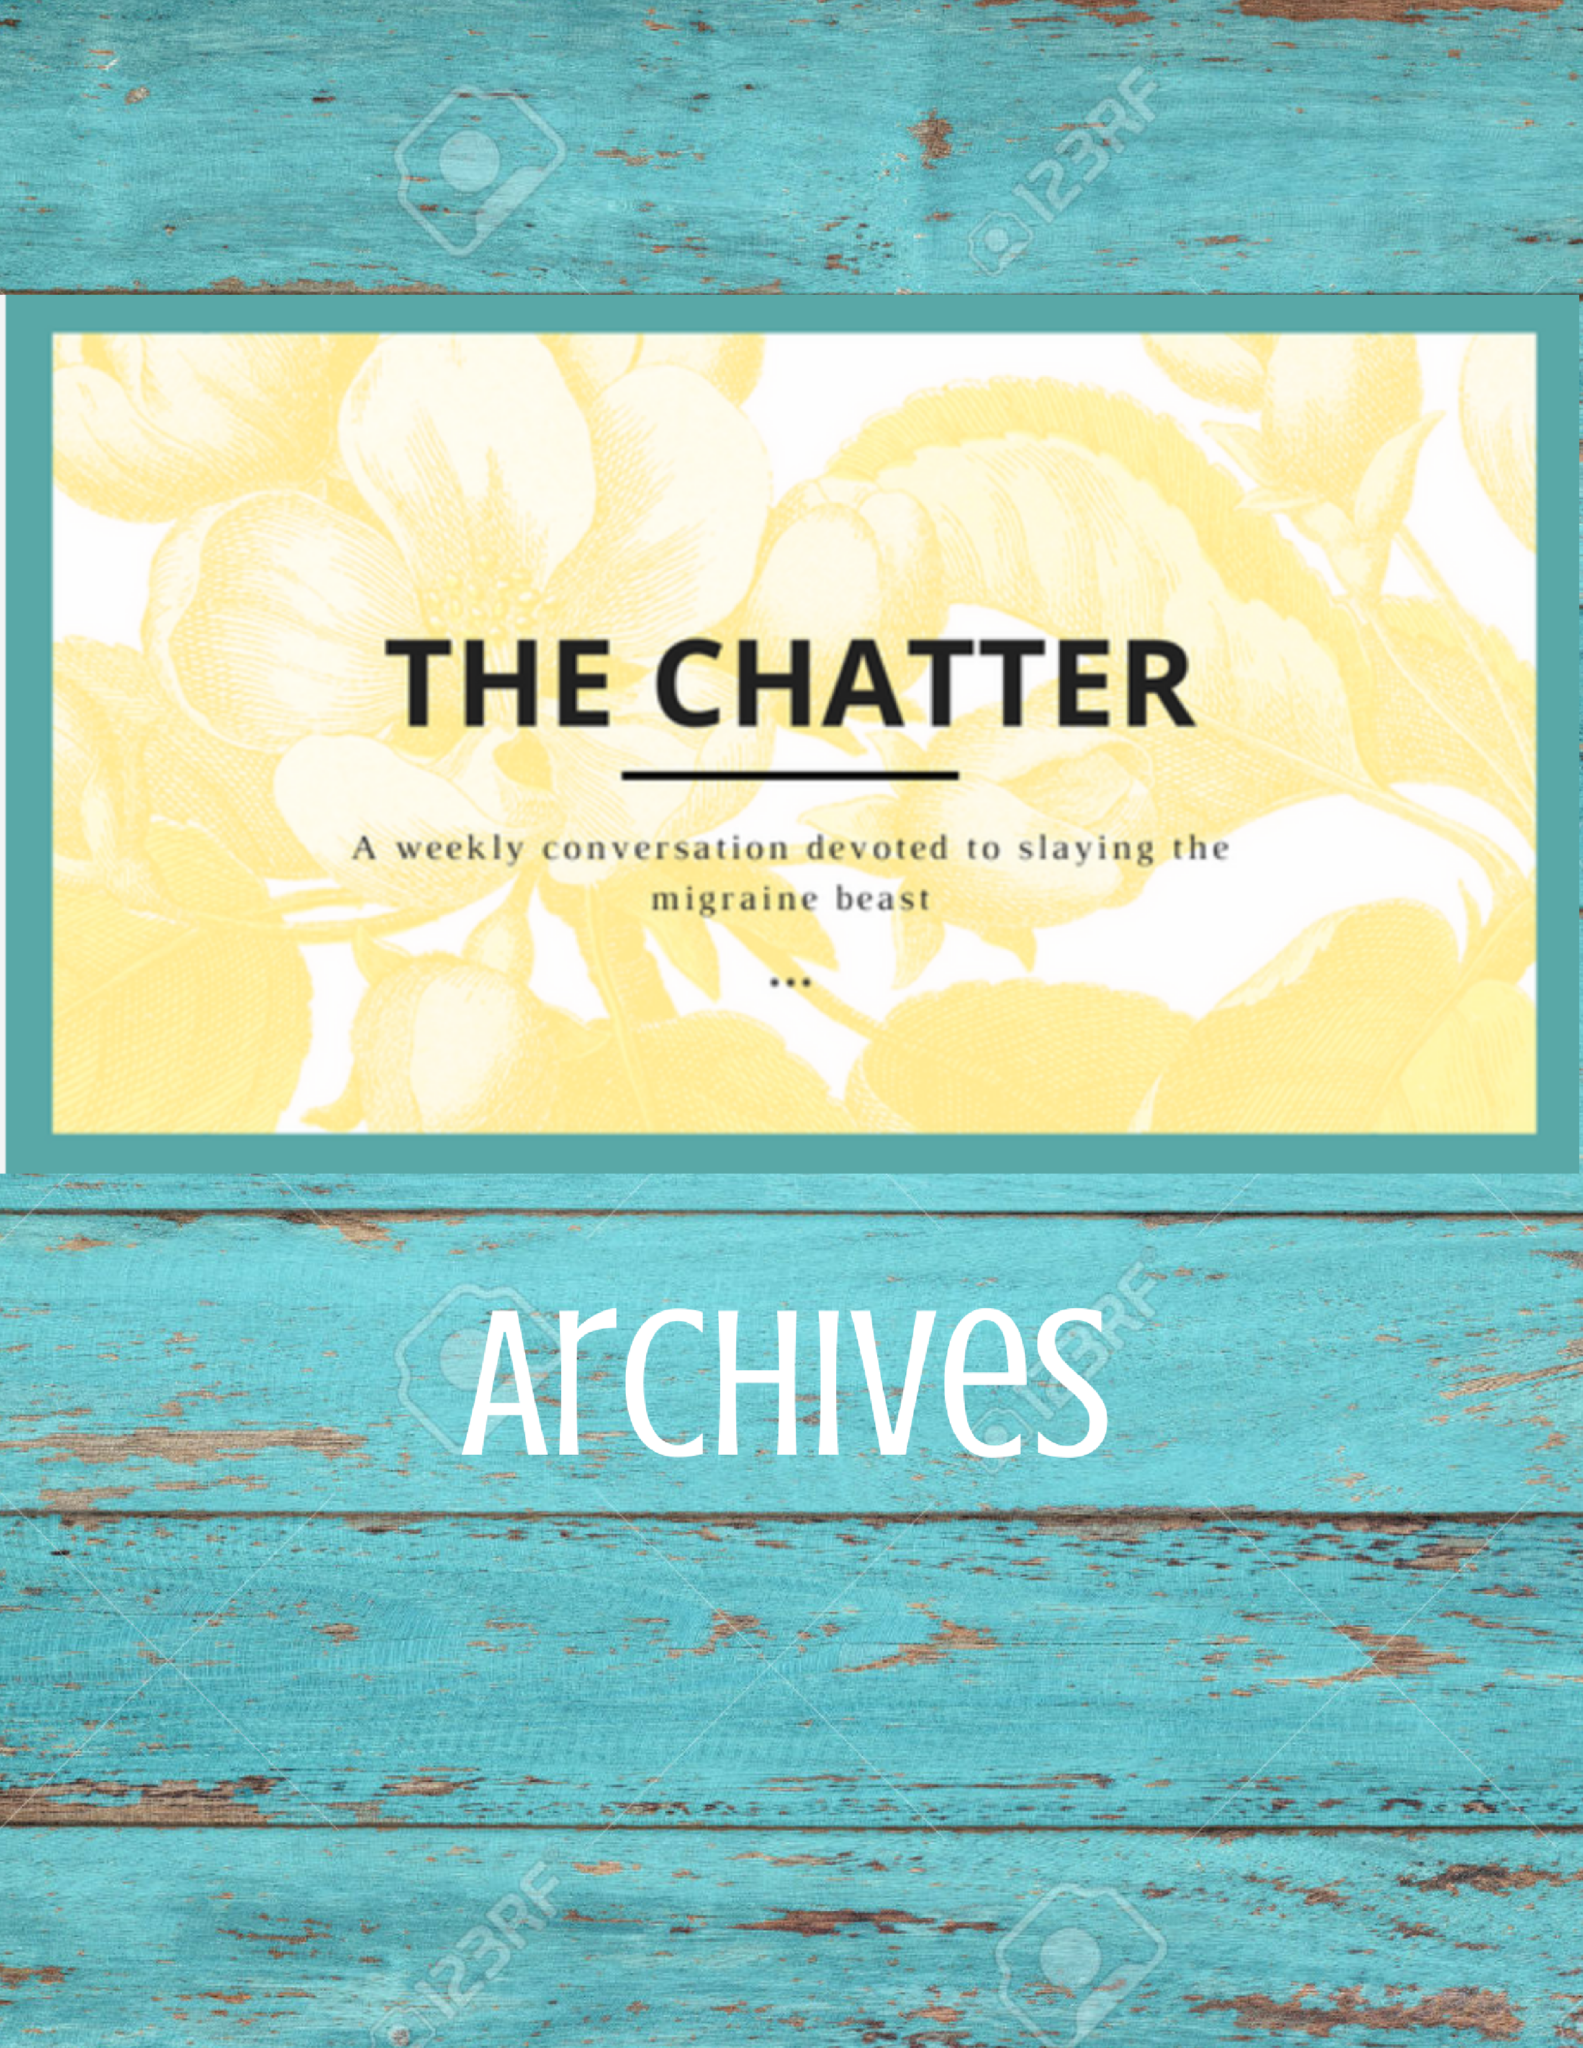 Free Issue Of The Chatter And A List Of Chatter Topics Covered My Migraine Miracle